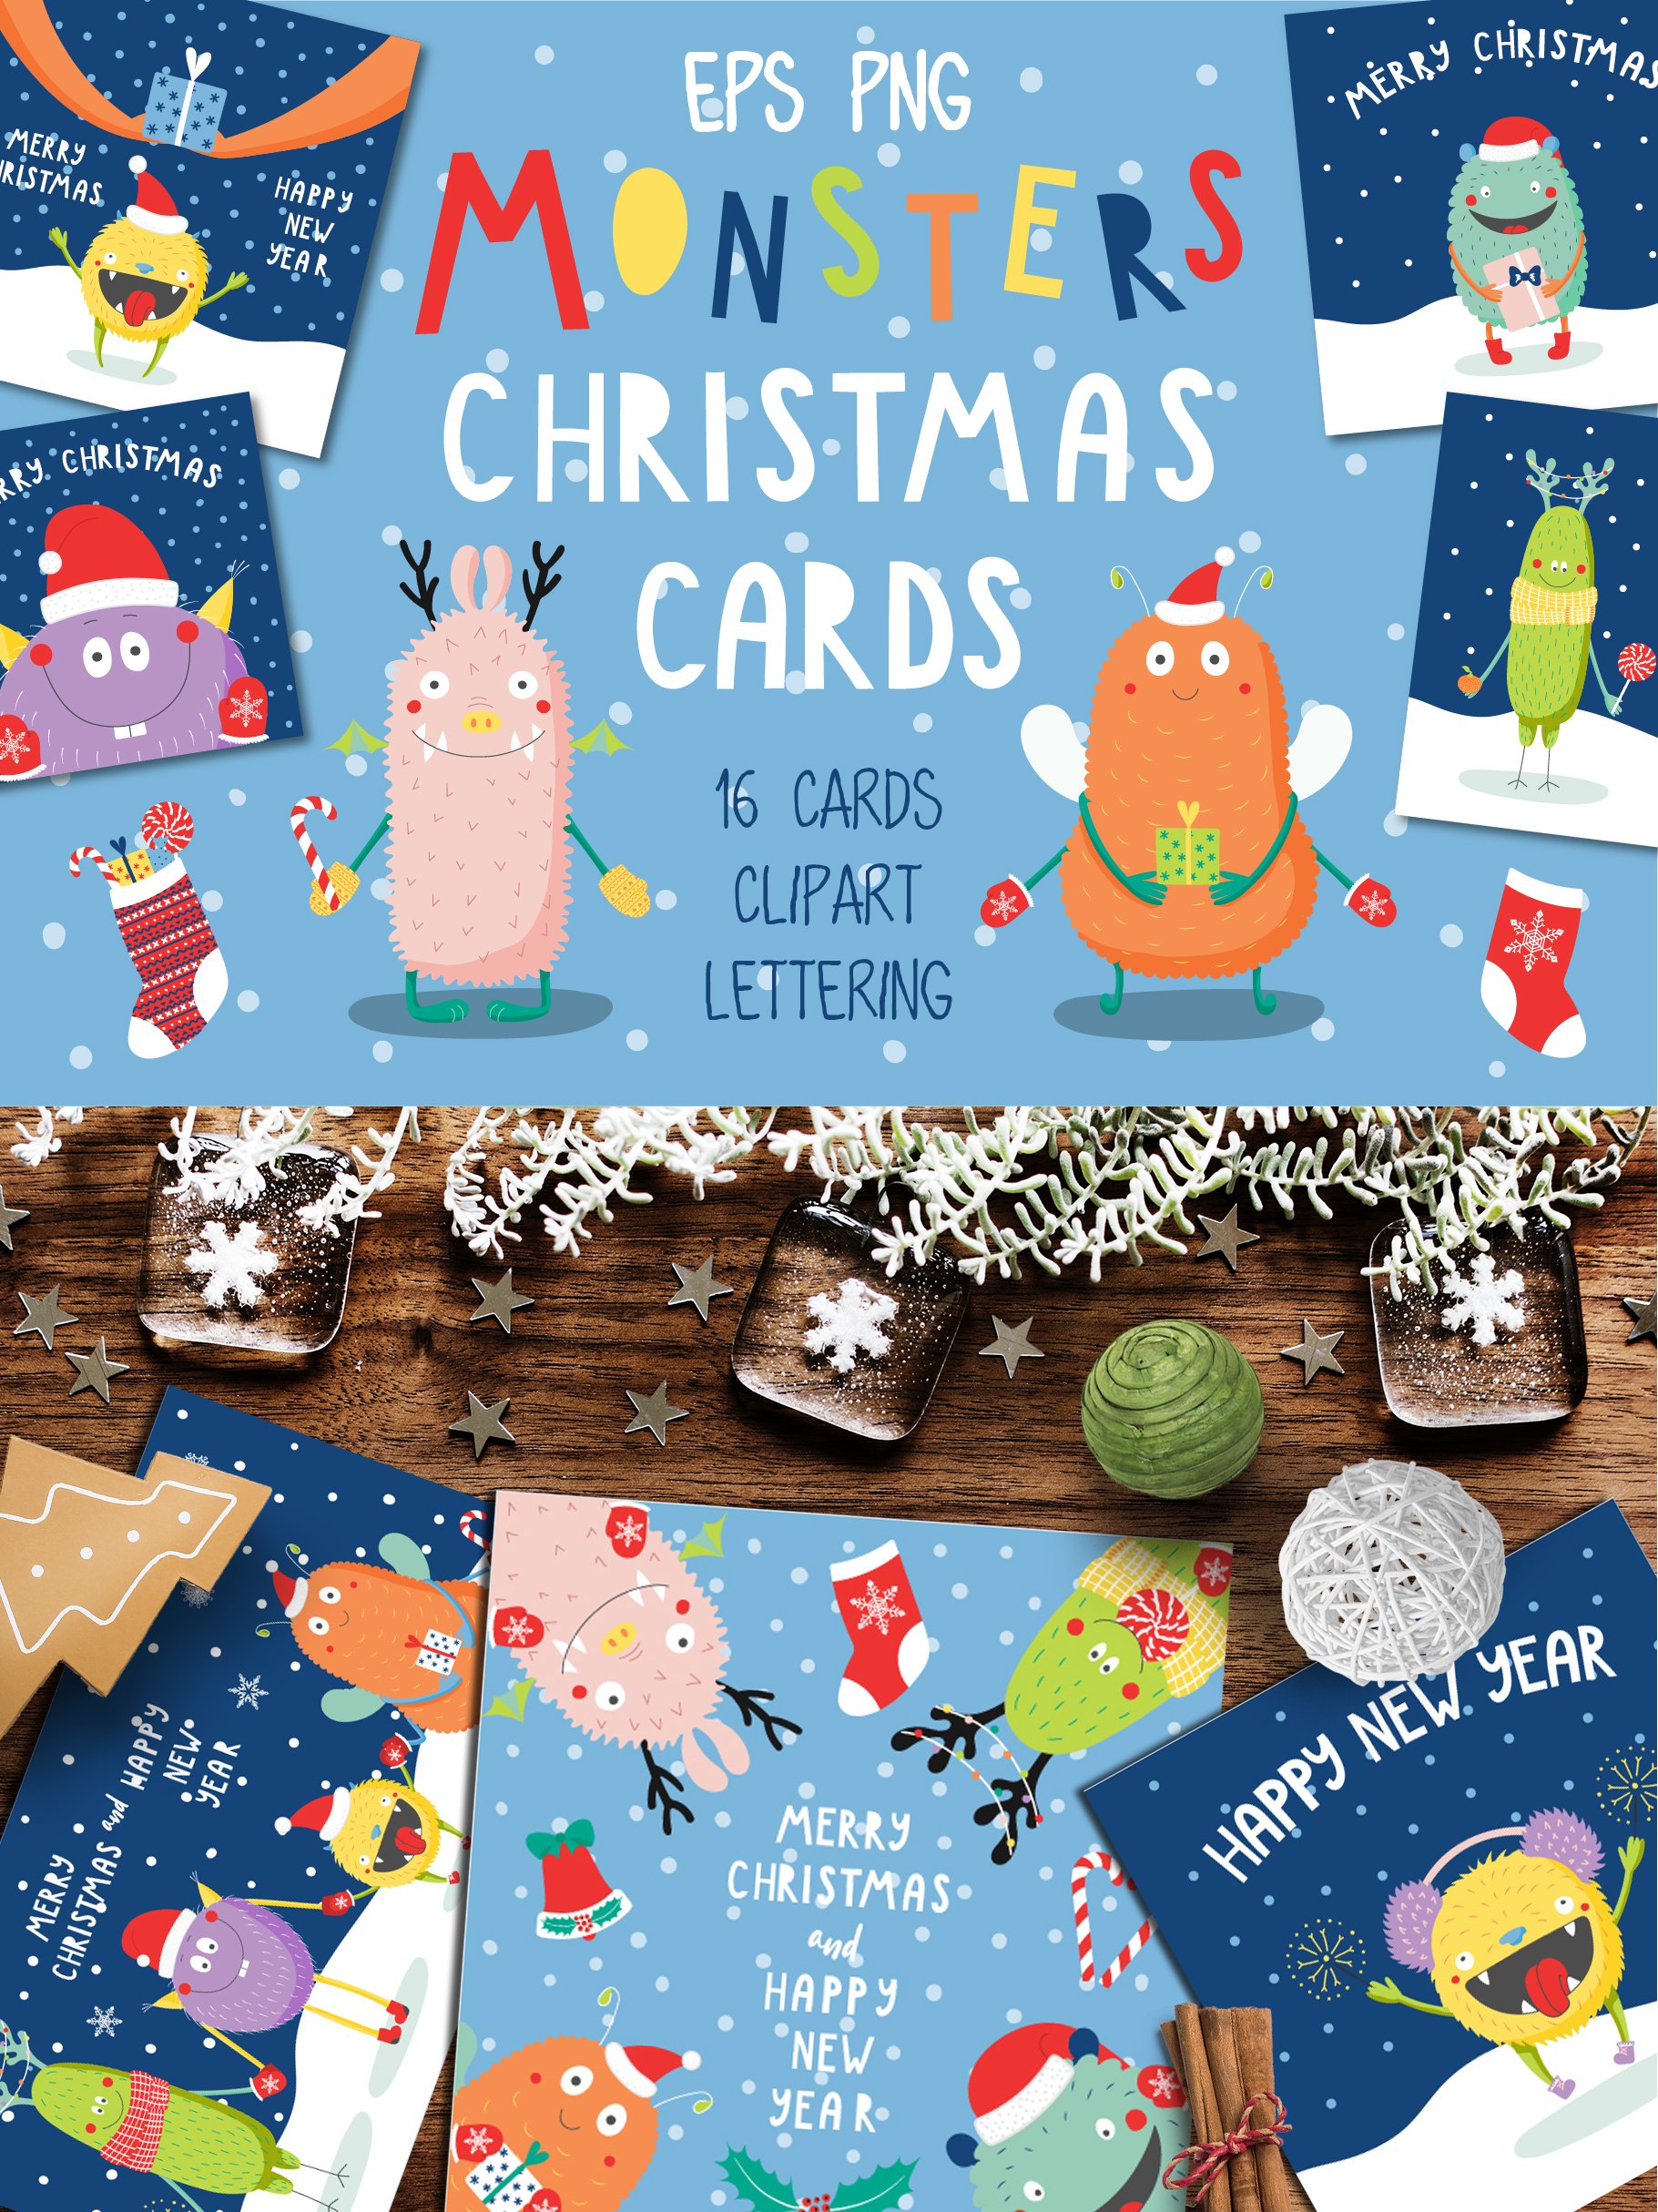 Cute Monsters Christmas Cards cover image.